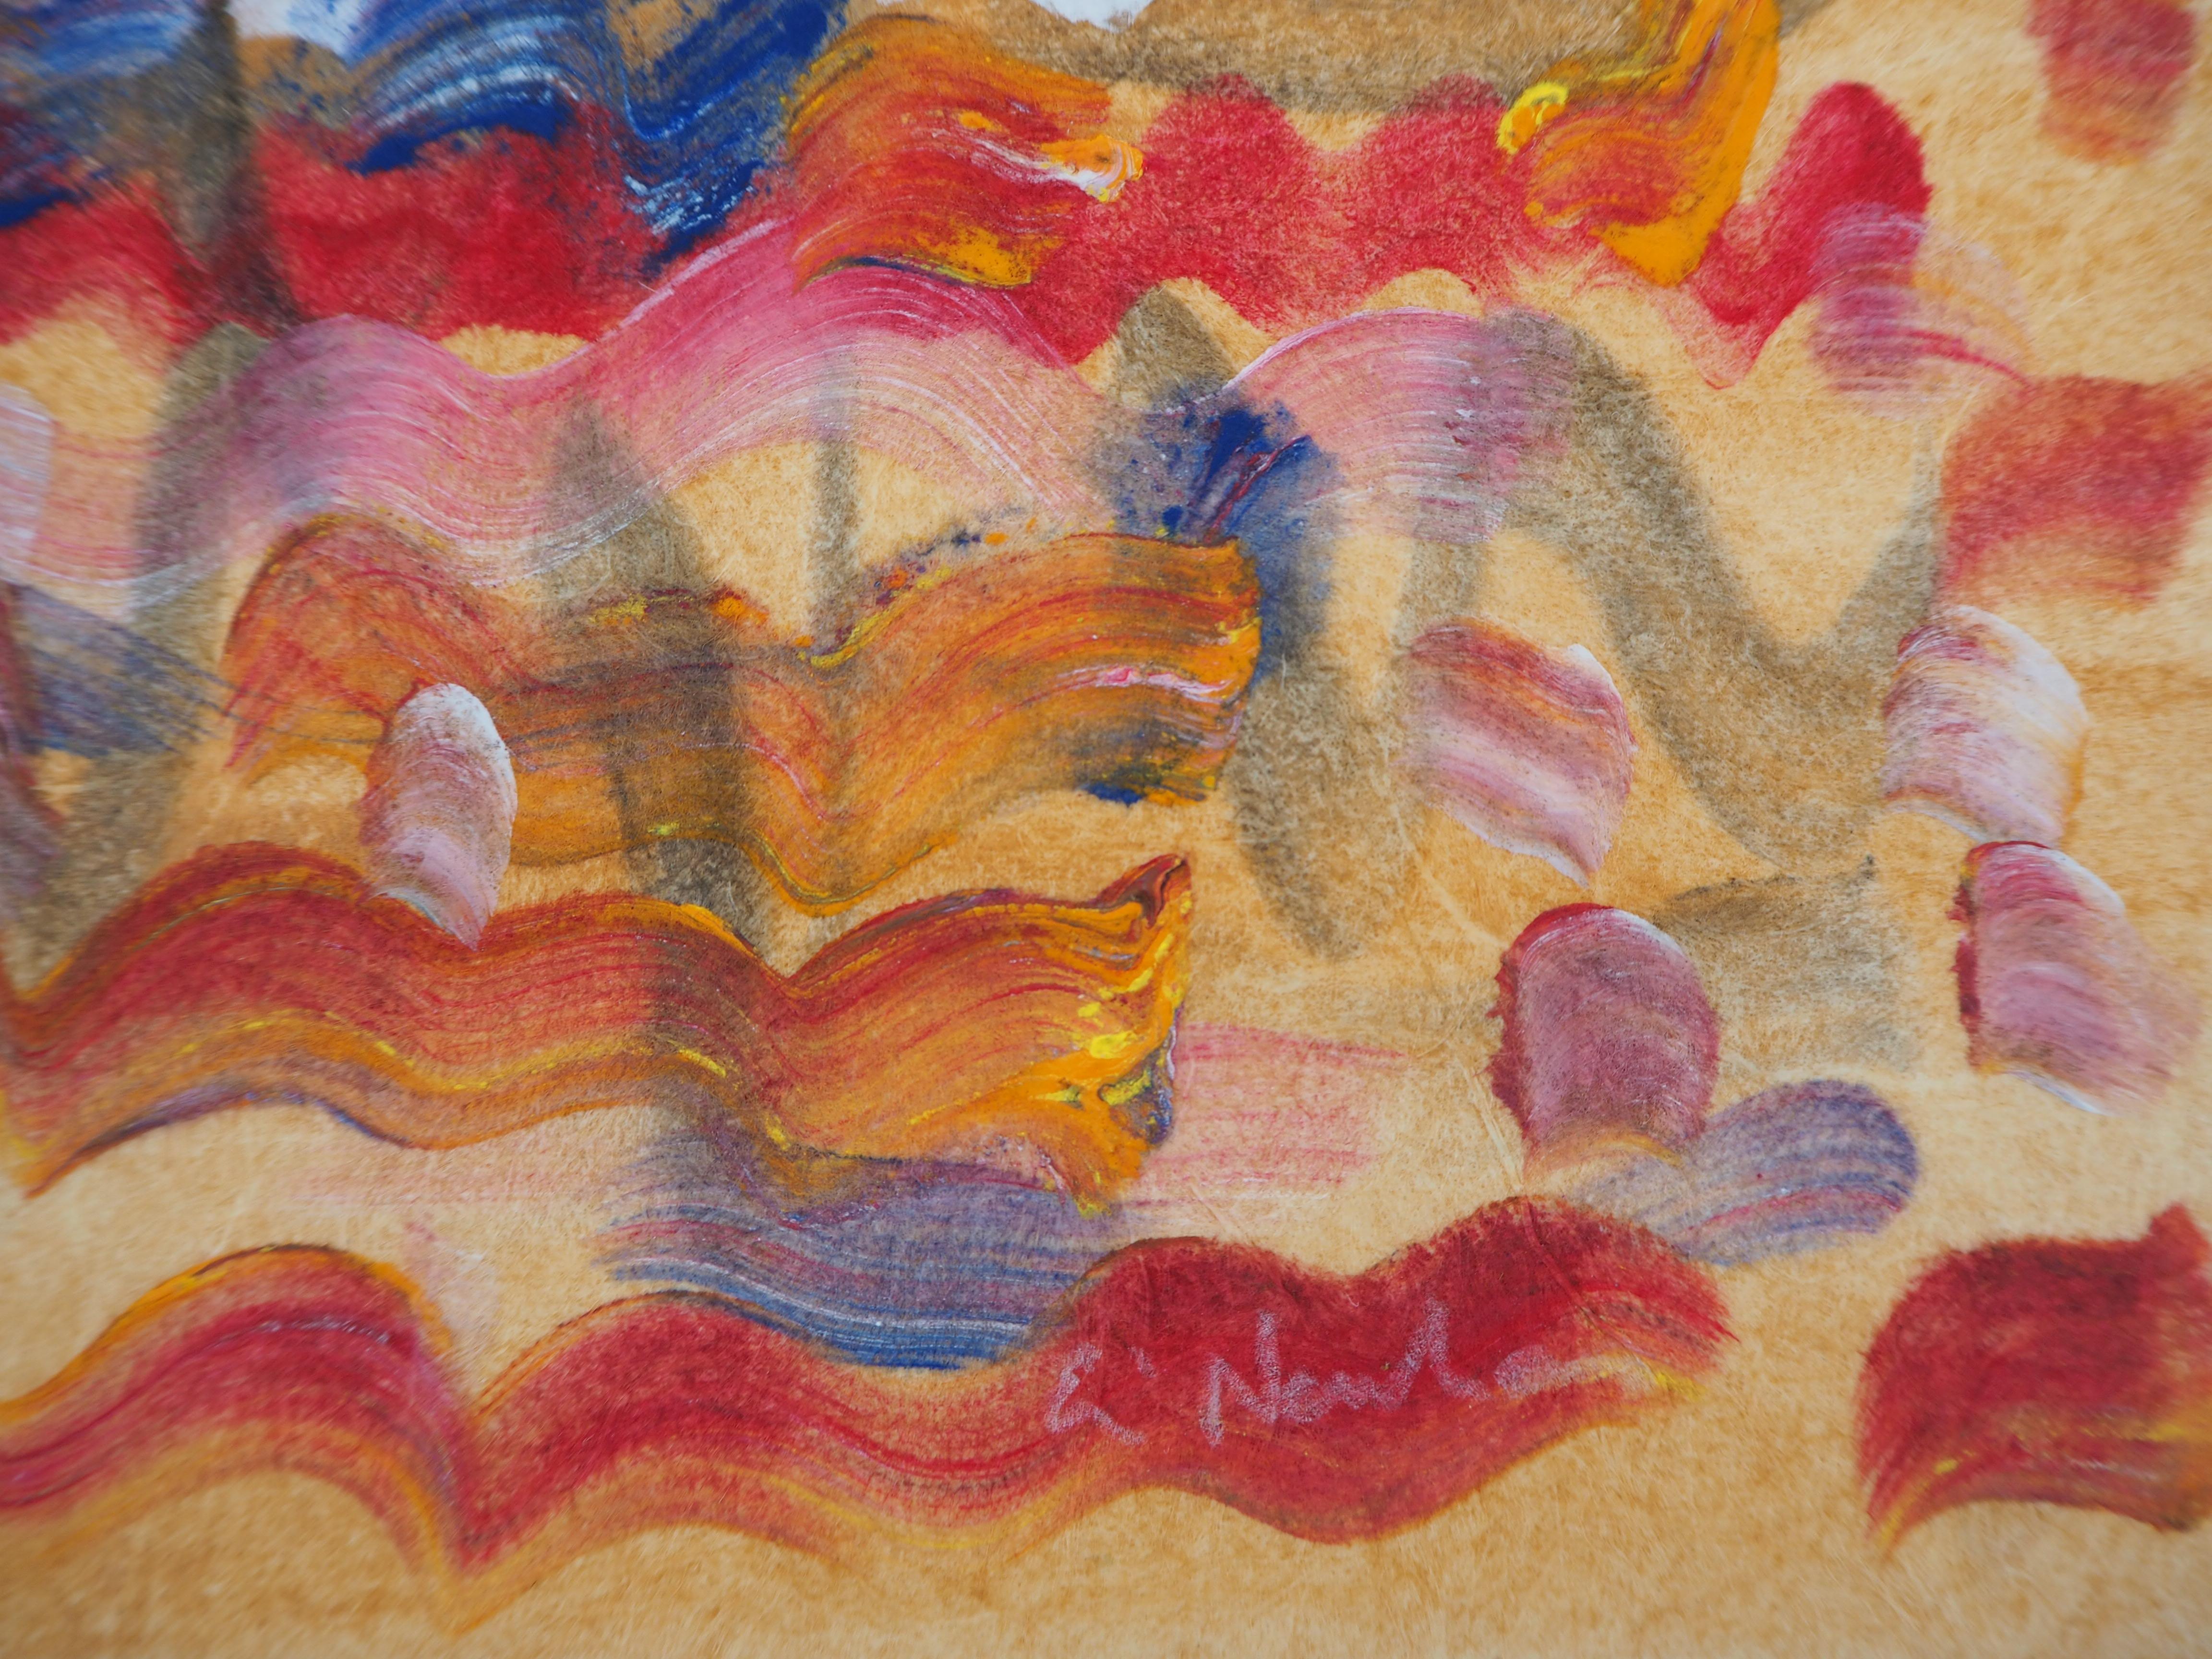 Colored Waves - Original handsigned watercolor and tempera - Art by Ervin Neuhaus